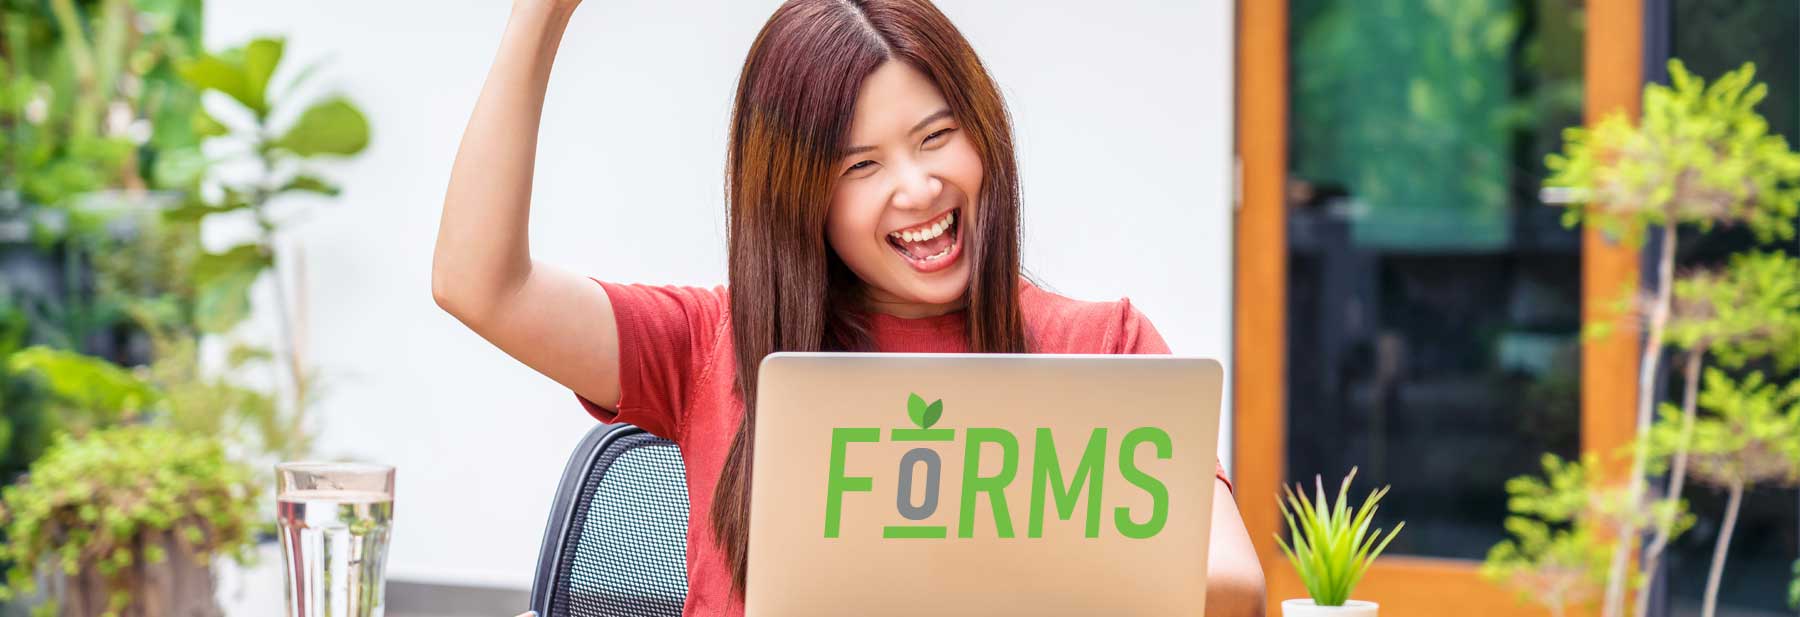 eForms and e-signatures integrated into a LMS